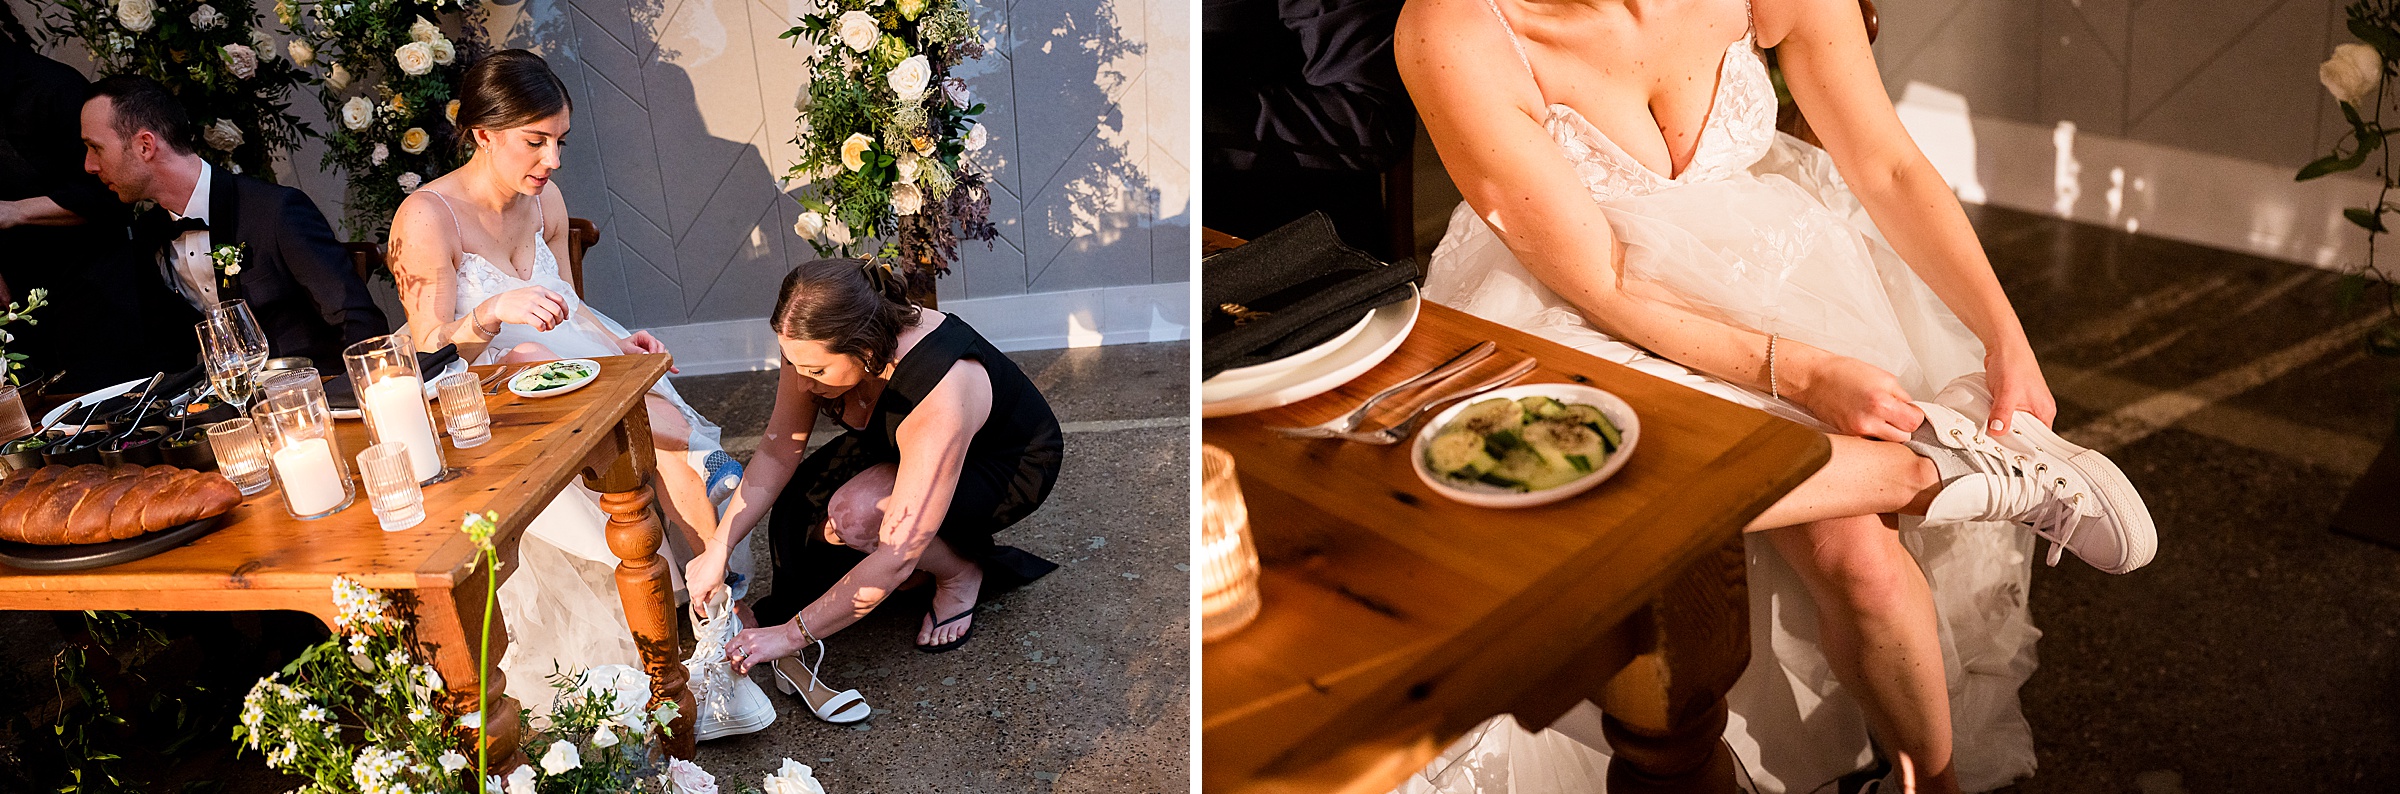 A bride is getting ready for her wedding, putting on her shoes at a table during a Lilah Events celebration.